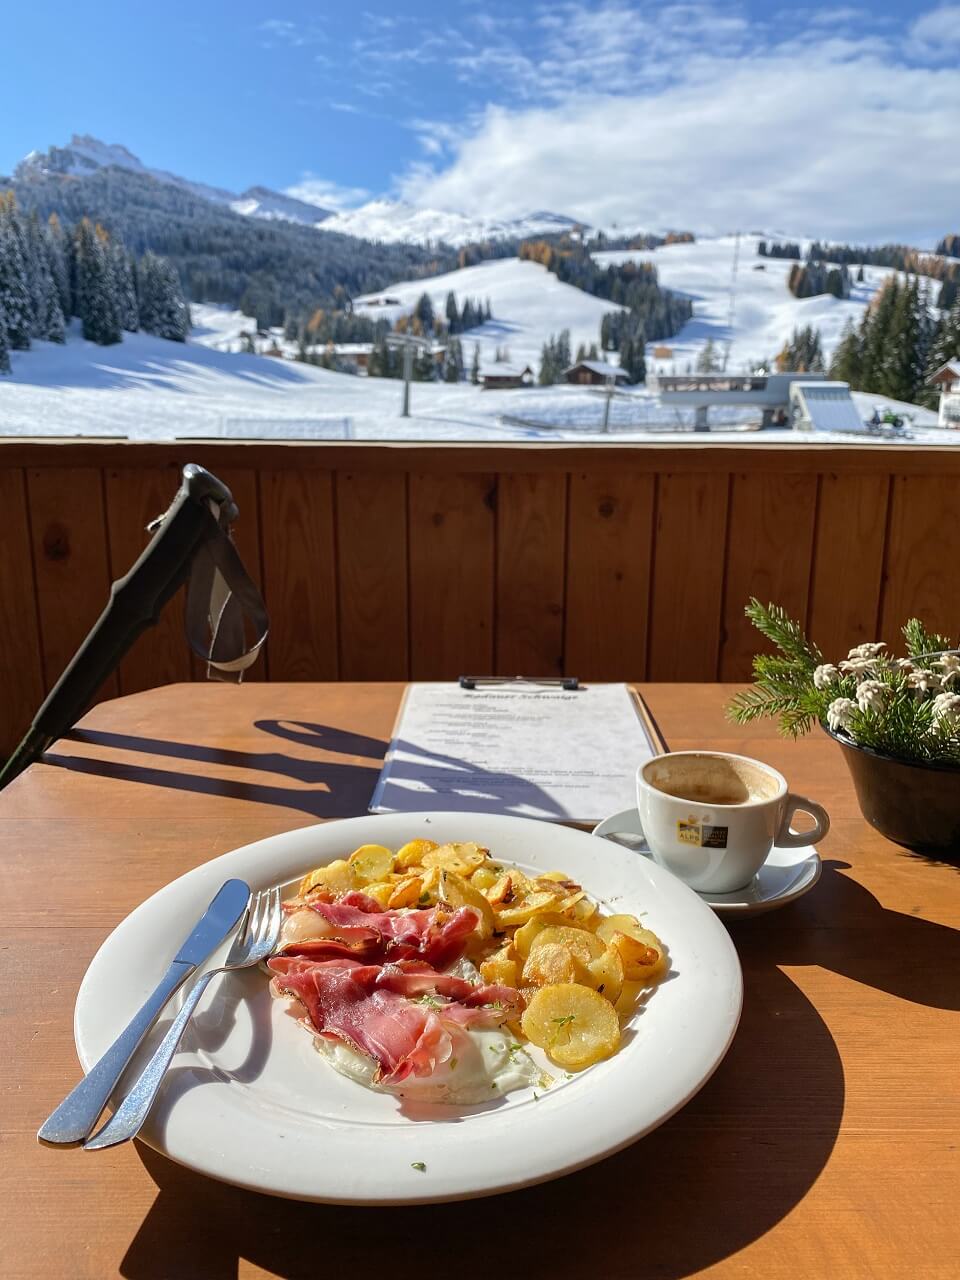 ham, eggs and fried potatoes for lunch in italy against snow backdrop